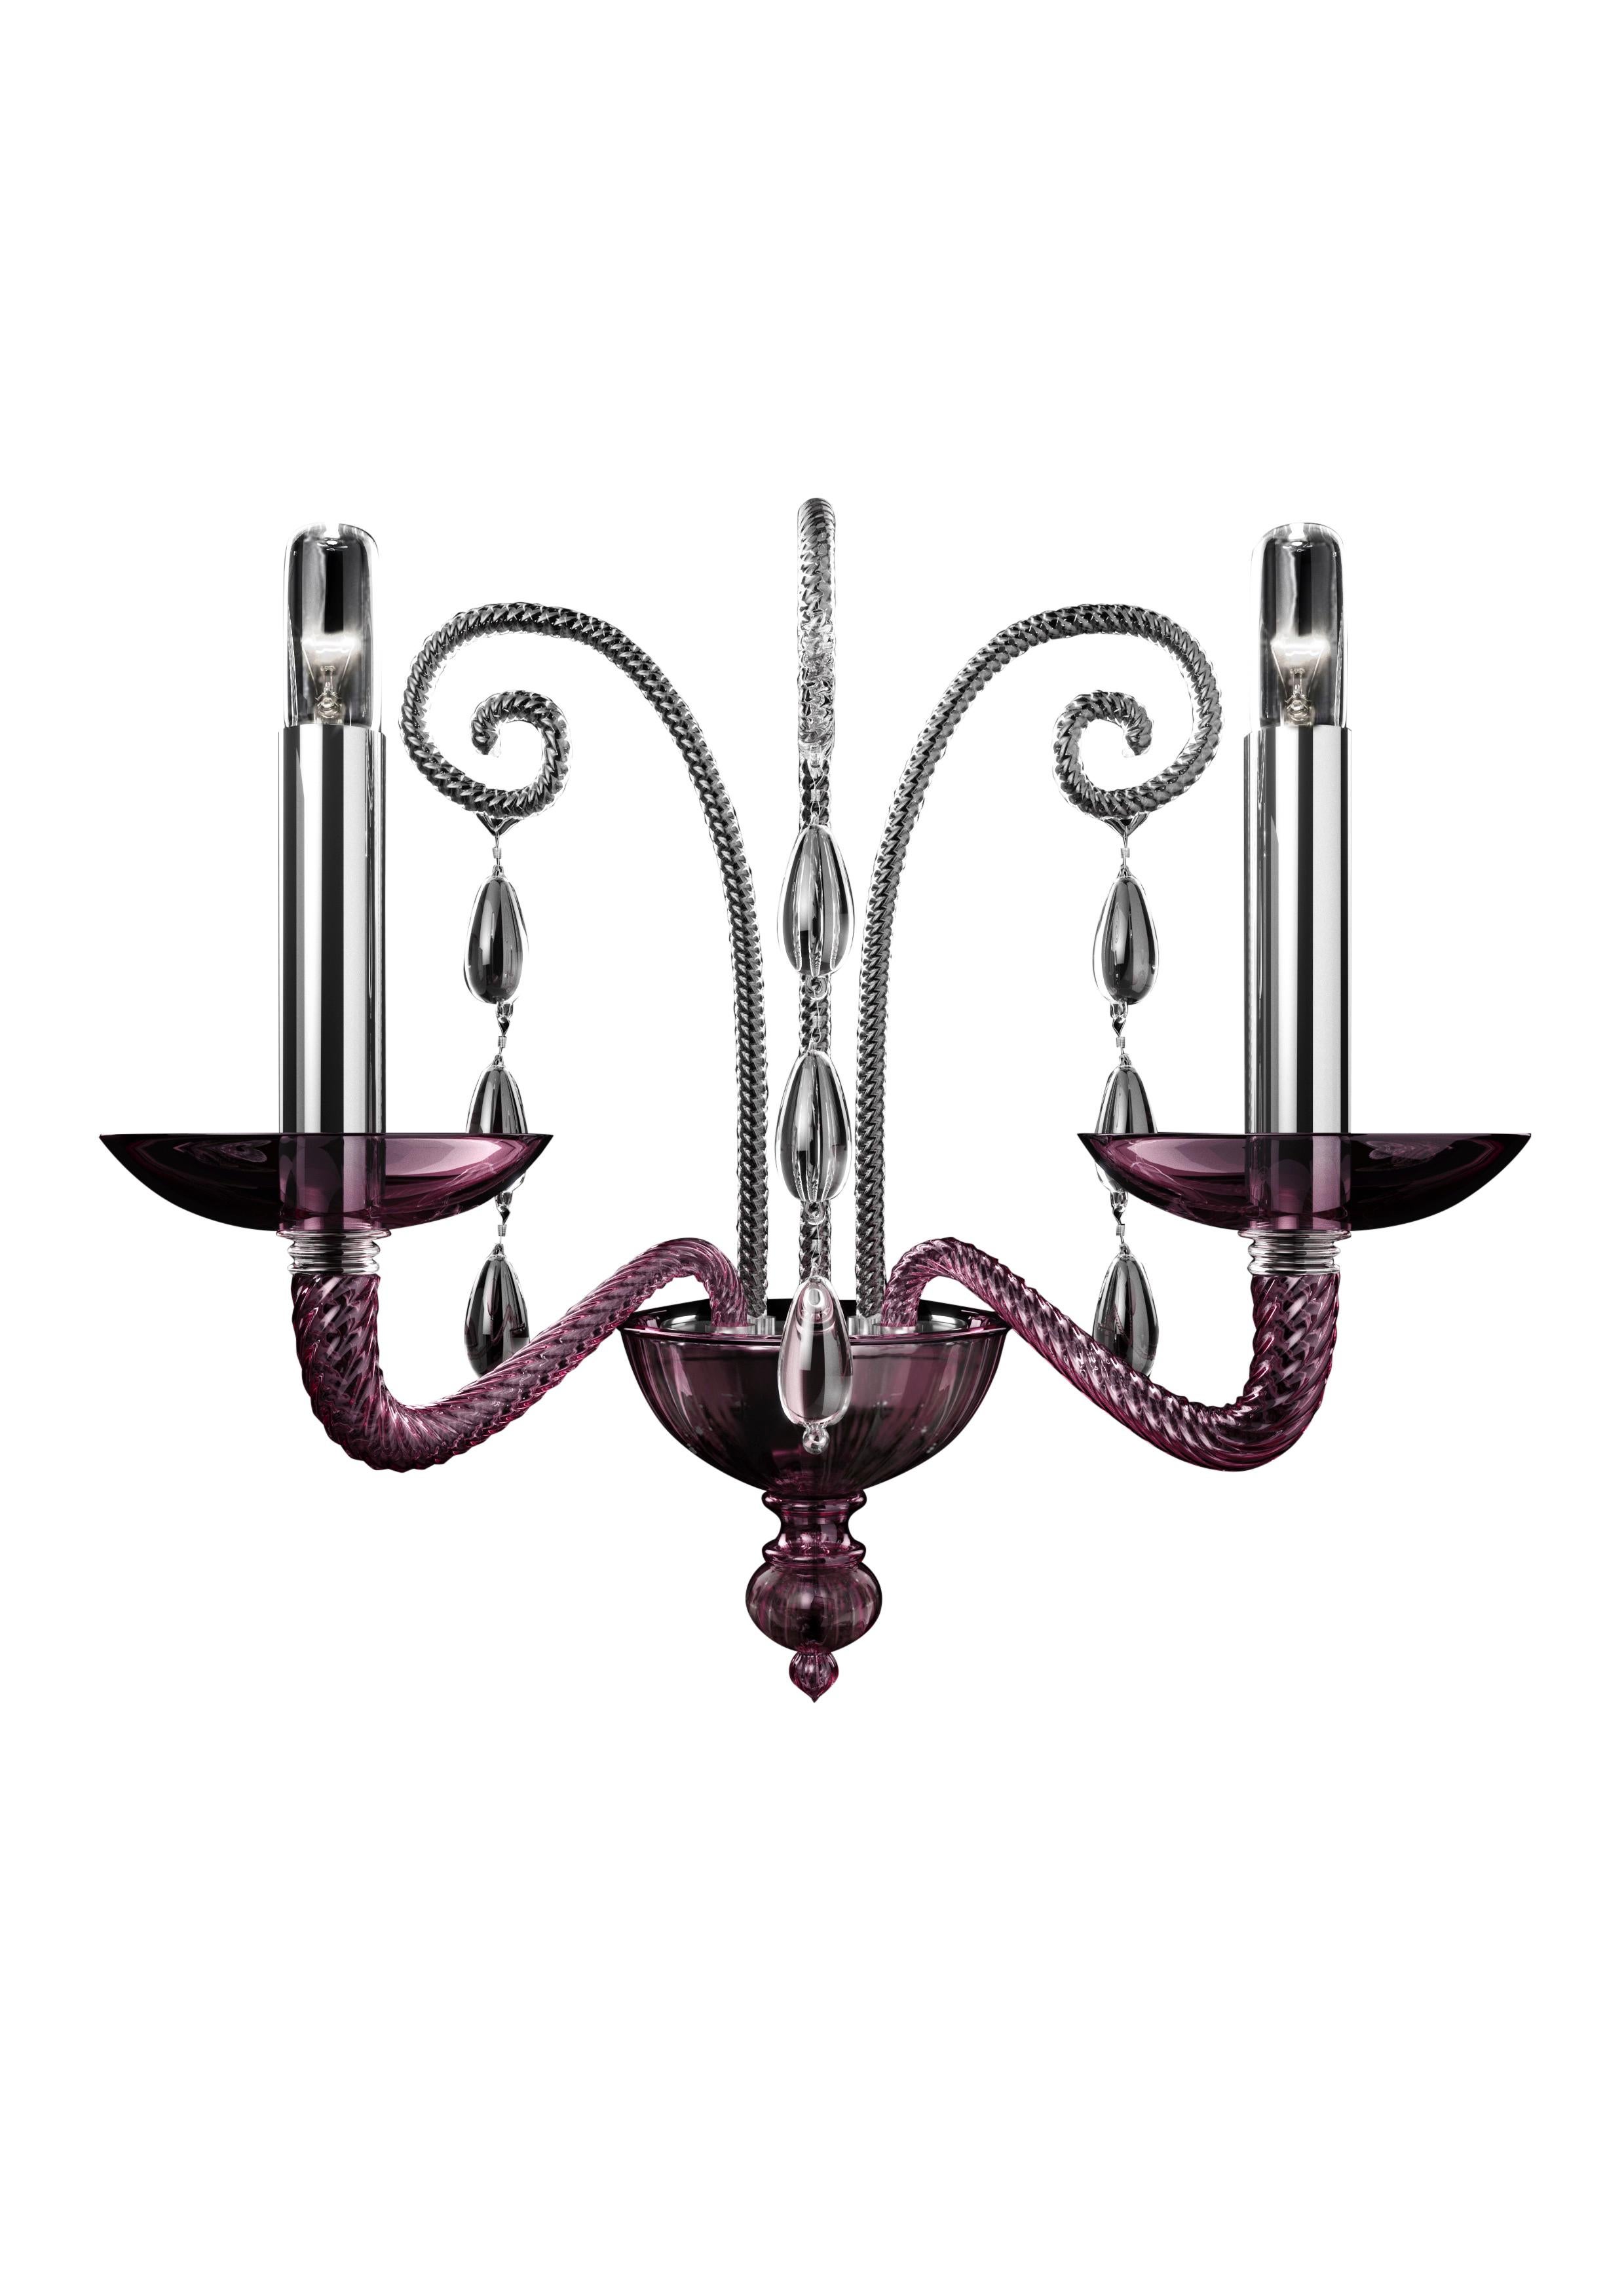 Purple (Violet_VI) Taymyr 5589 02 Wall Sconce in Glass with Polished Chrome Finish, by Barovier